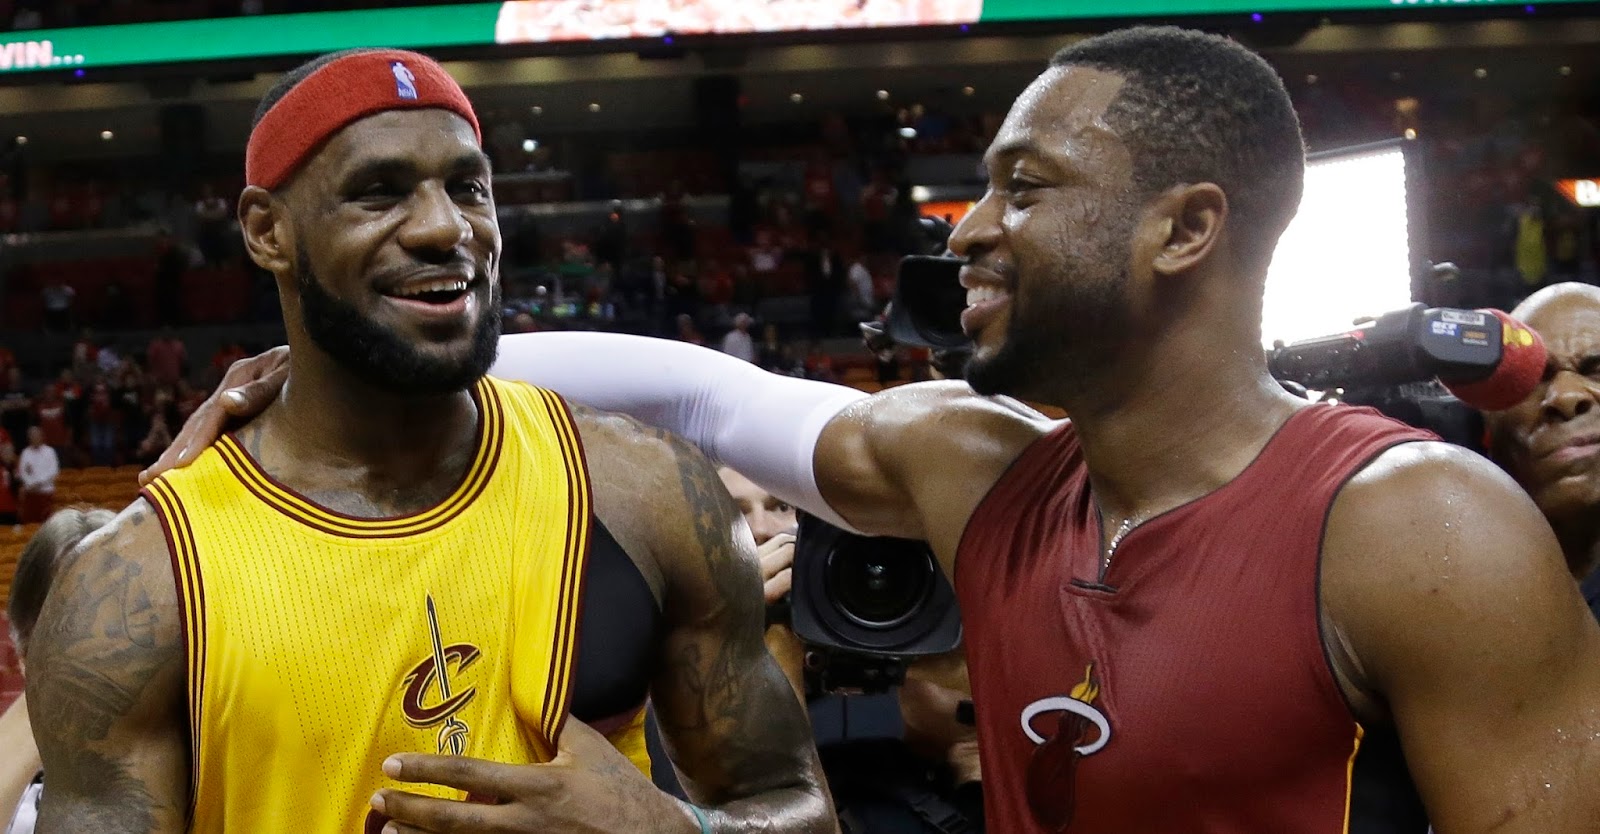 KeeleSports: Dwyane Wade playing for the Cavaliers next year would be a lose-lose ...